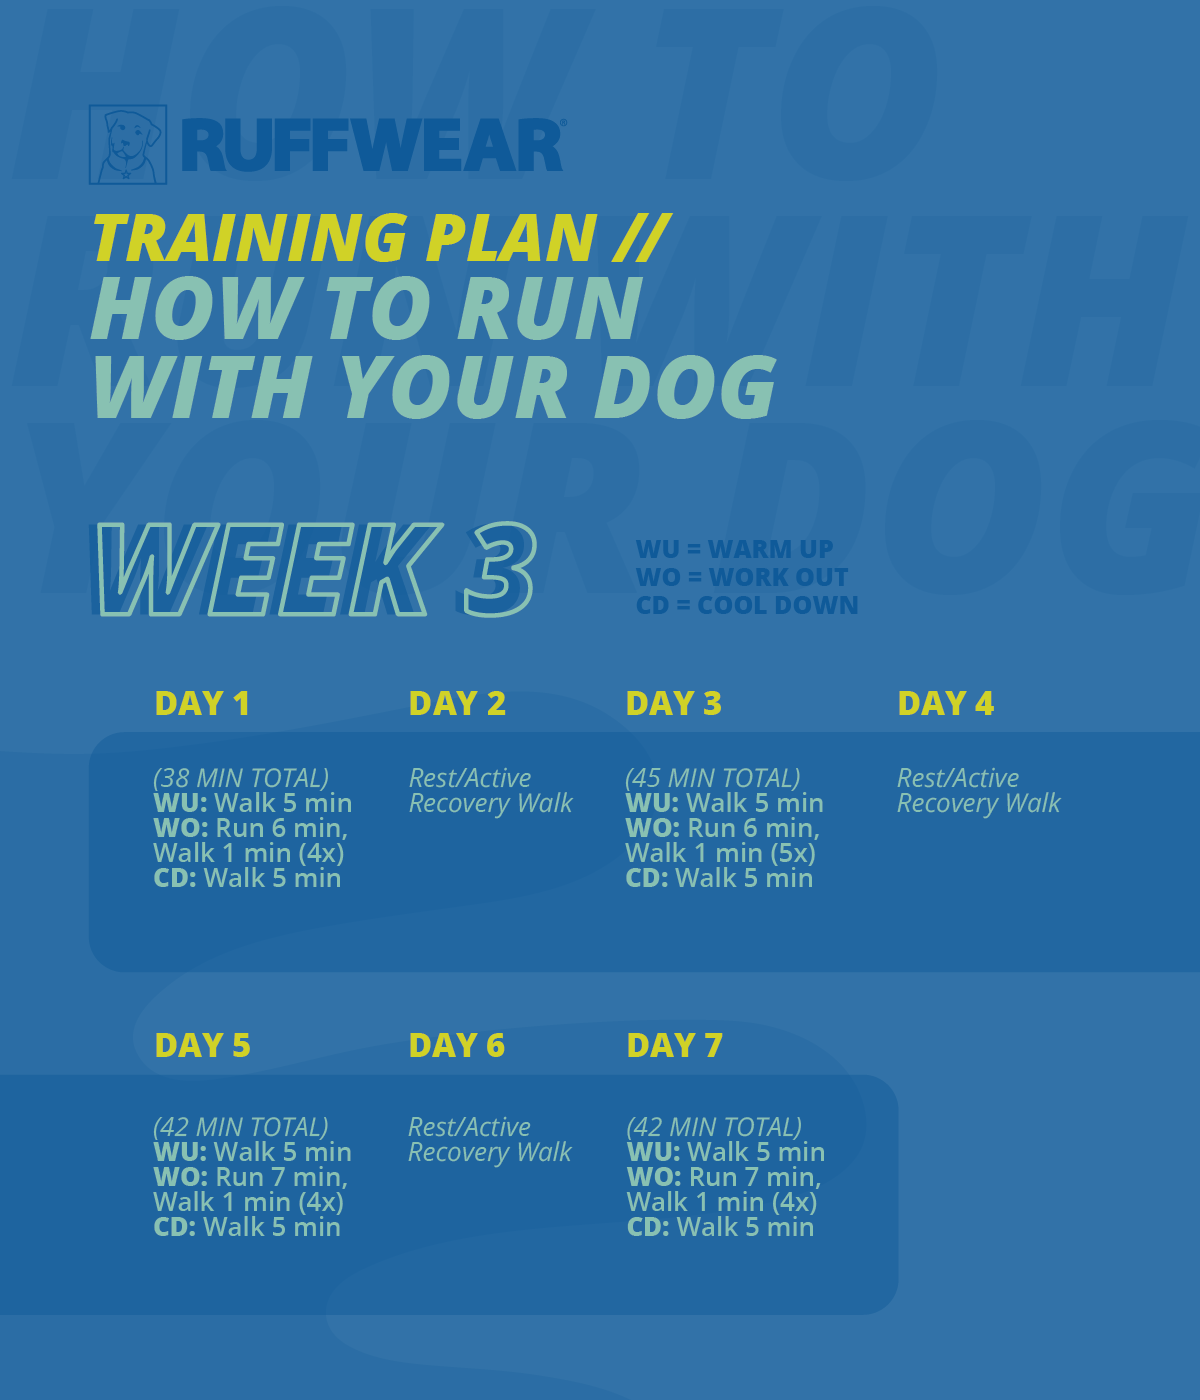 training plan for running with your dog week 3